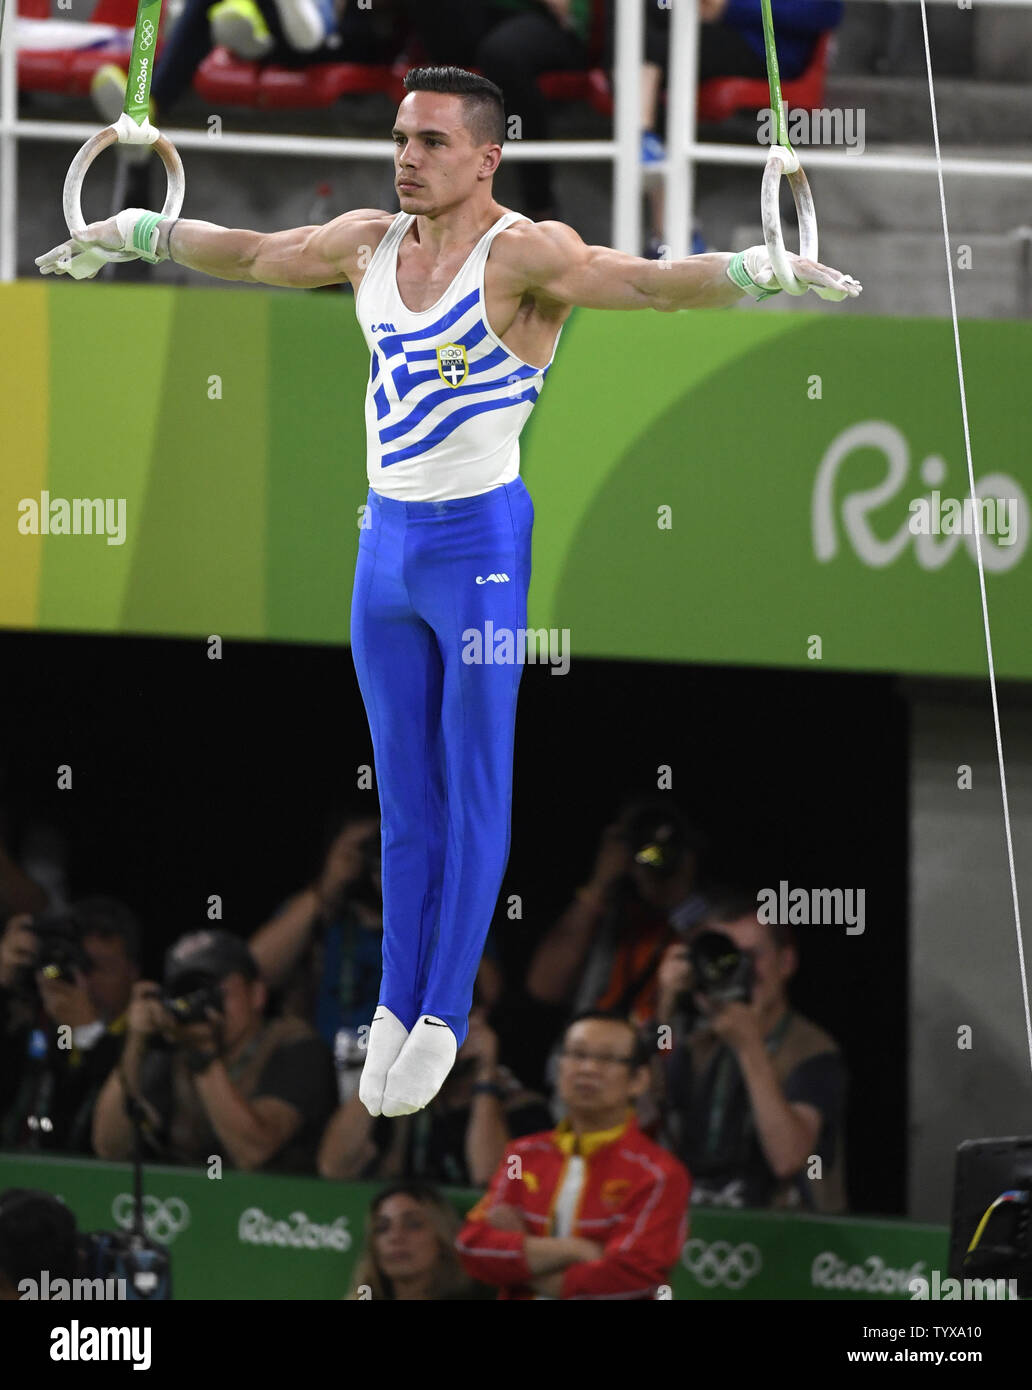 Greece's Eleftherios Petrounias goes through his routine on the Rings during the Men's Rings Final at the 2016 Rio Summer Olympics in Rio de Janeiro, Brazil, August 15, 2016. Petrounias won the Gold Medal, Brazil's Arthur Zanetti won the Silver and Russia's Denis Abliazin won the Bronze.       Photo by Mike Theiler/UPI Stock Photo